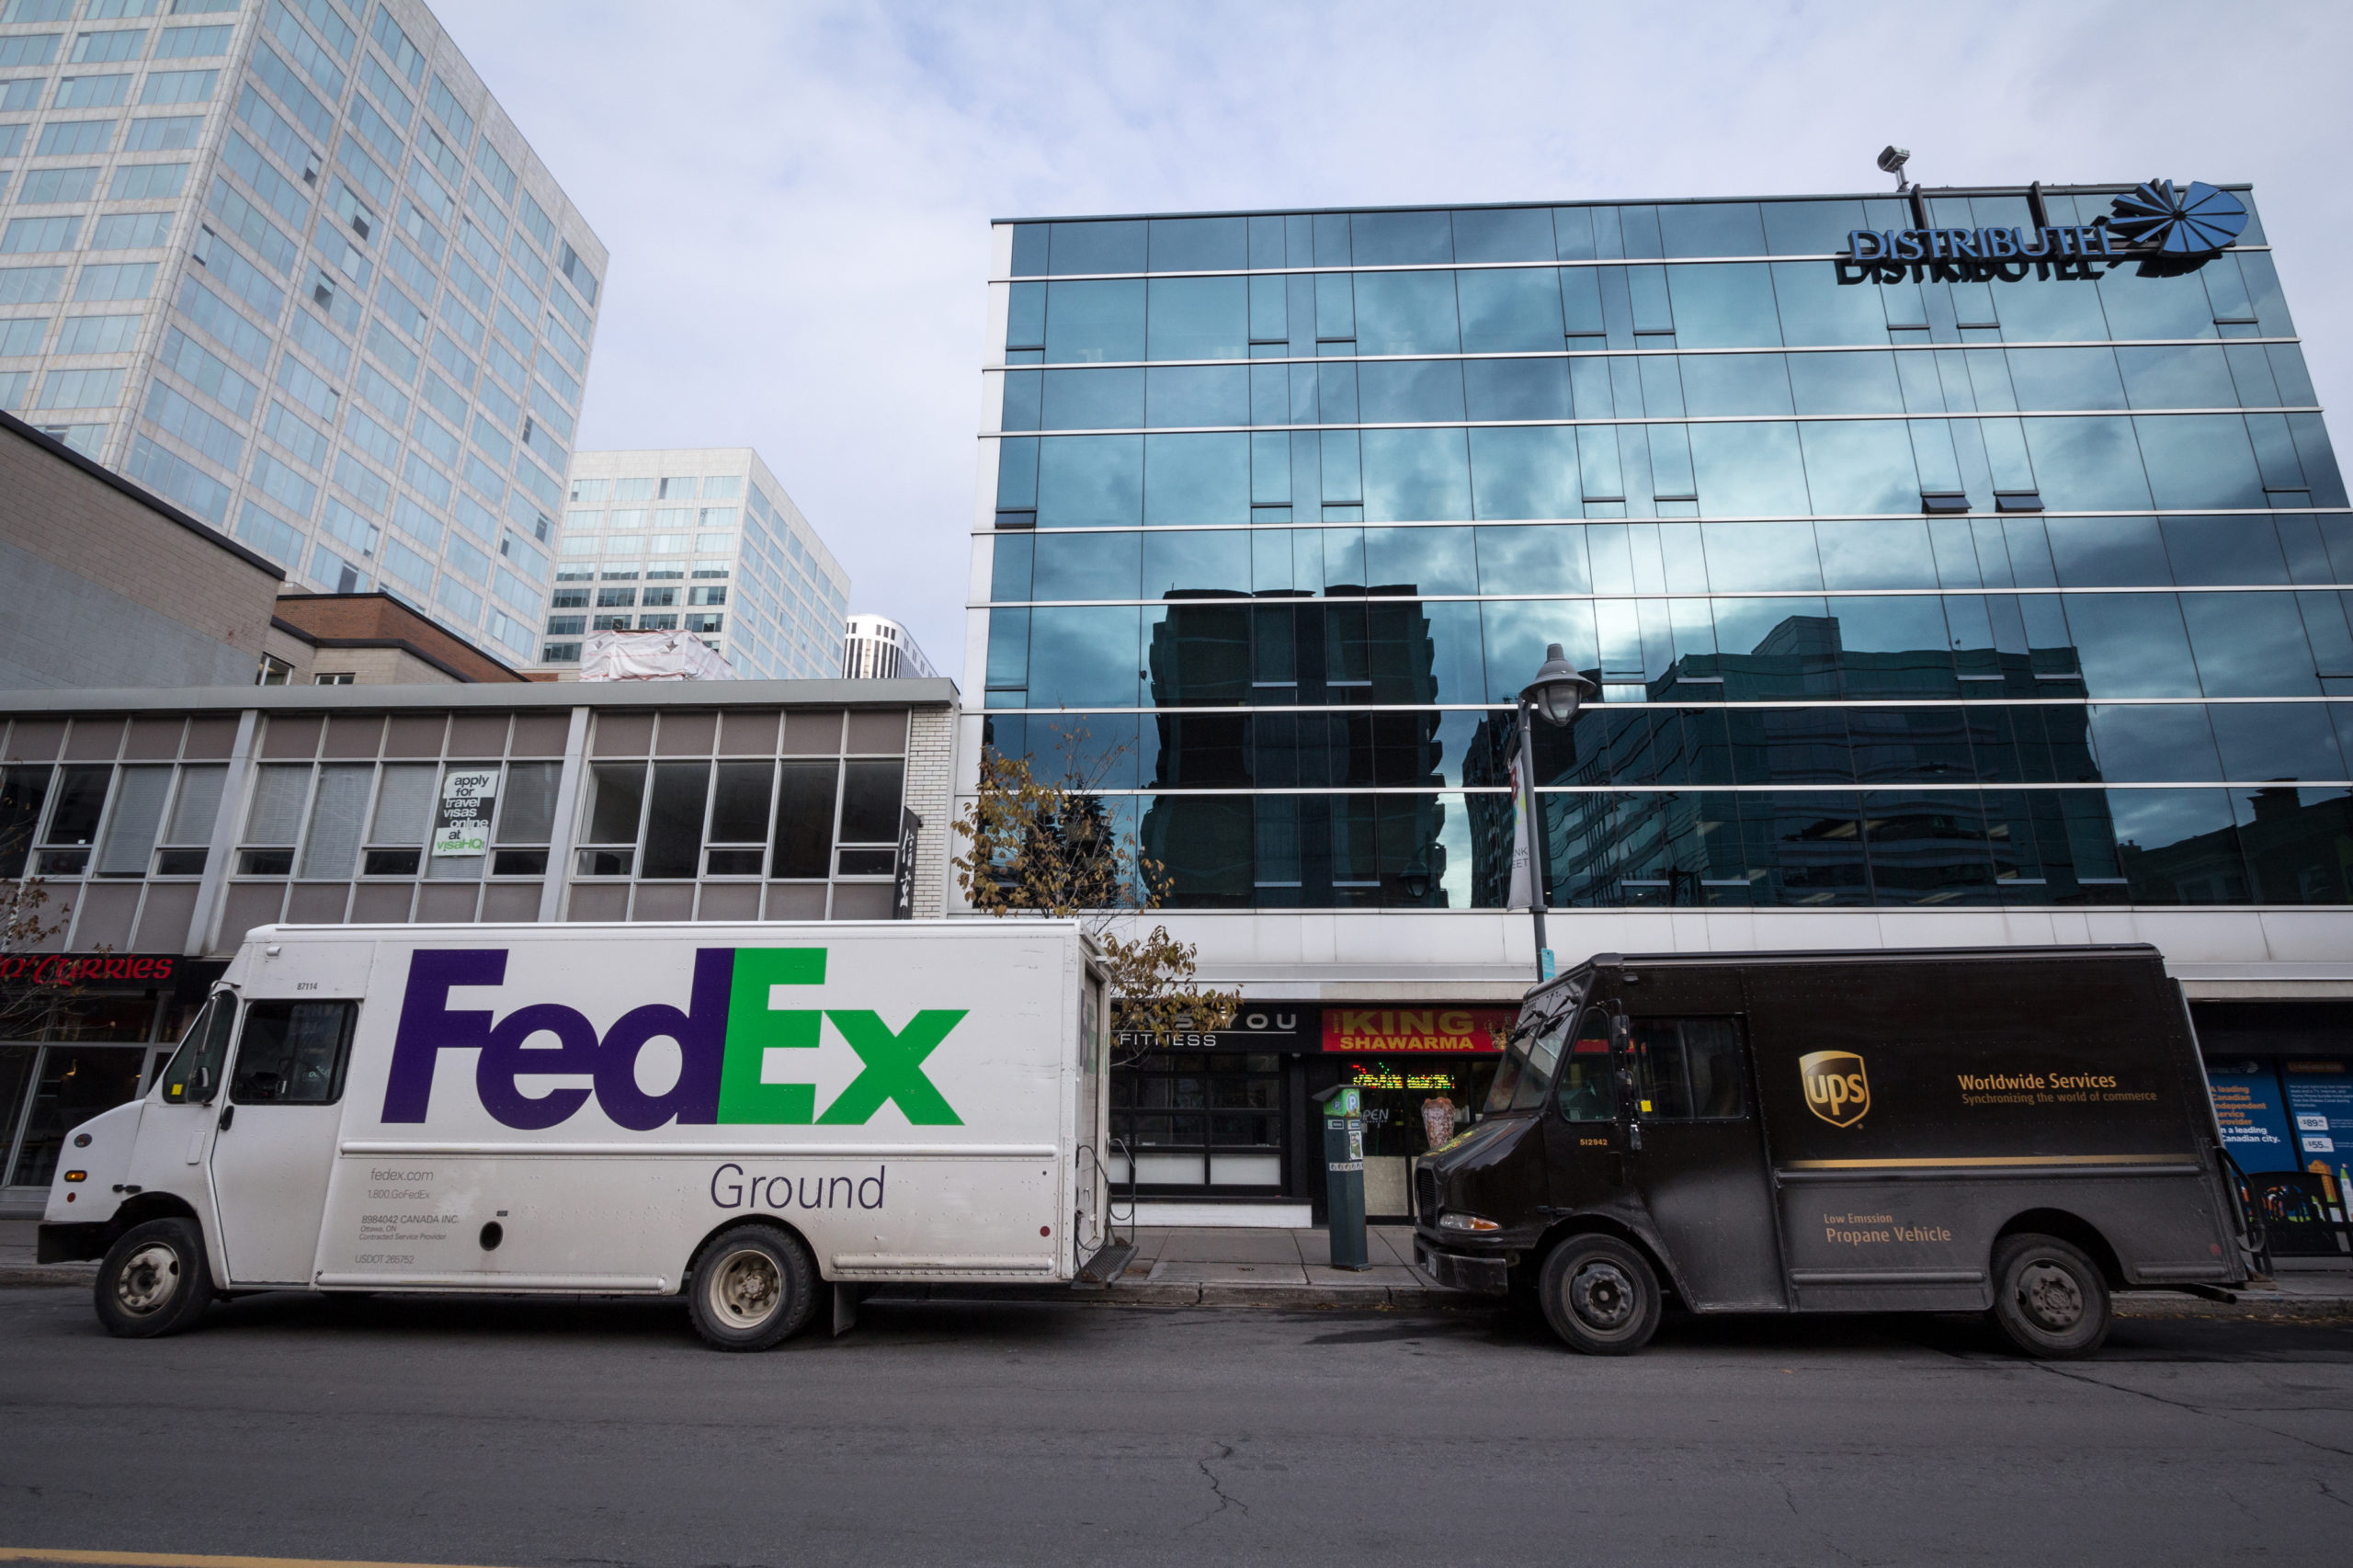 A FedEx and UPS trucks parked on the street in